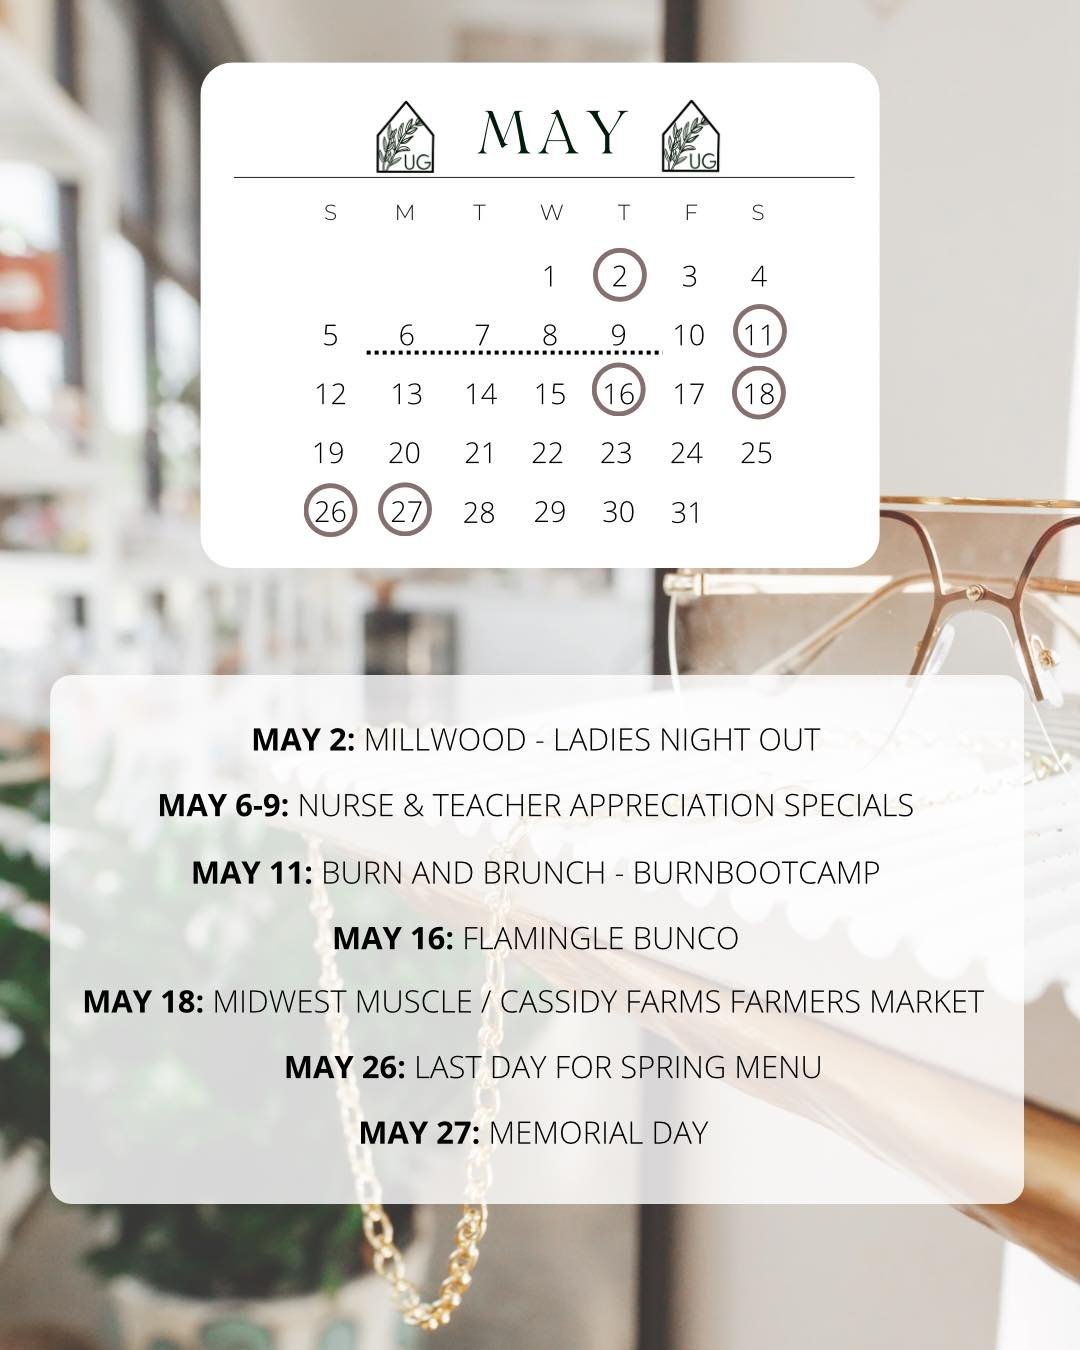 Hey Siri, play *NSYNC because &ldquo;it&rsquo;s gonna be May&rdquo;

Summer is creeping around the corner and we are so excited! May is full of fun events here at Urban Grounds and a few chances to see UG out in the community!

We are kicking off the